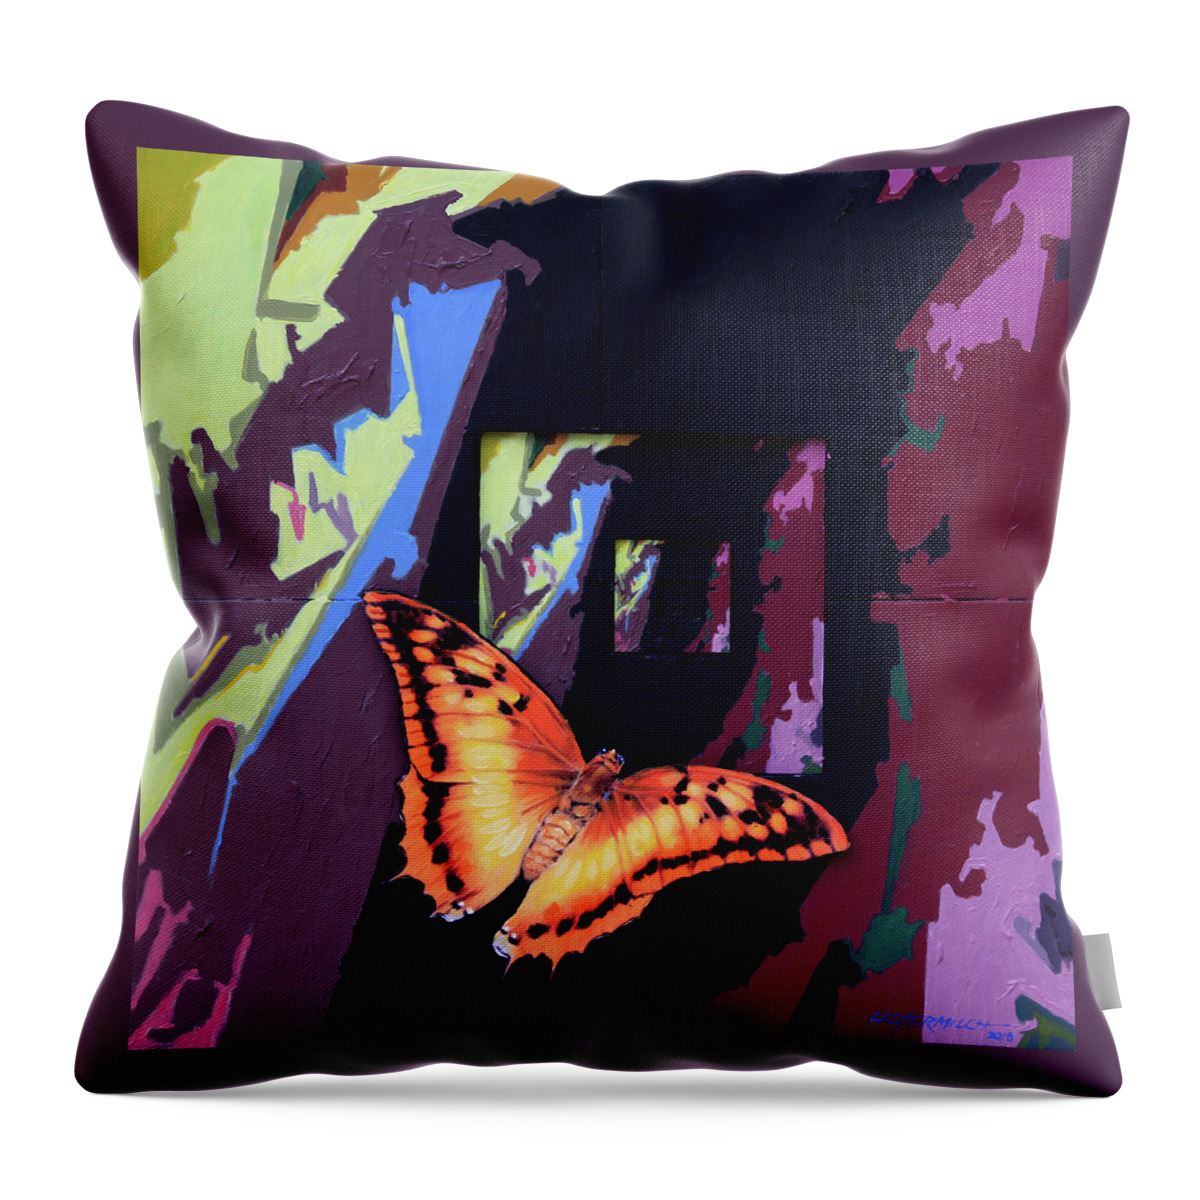 Butterfly Throw Pillow featuring the painting Flight Into Eternity by John Lautermilch